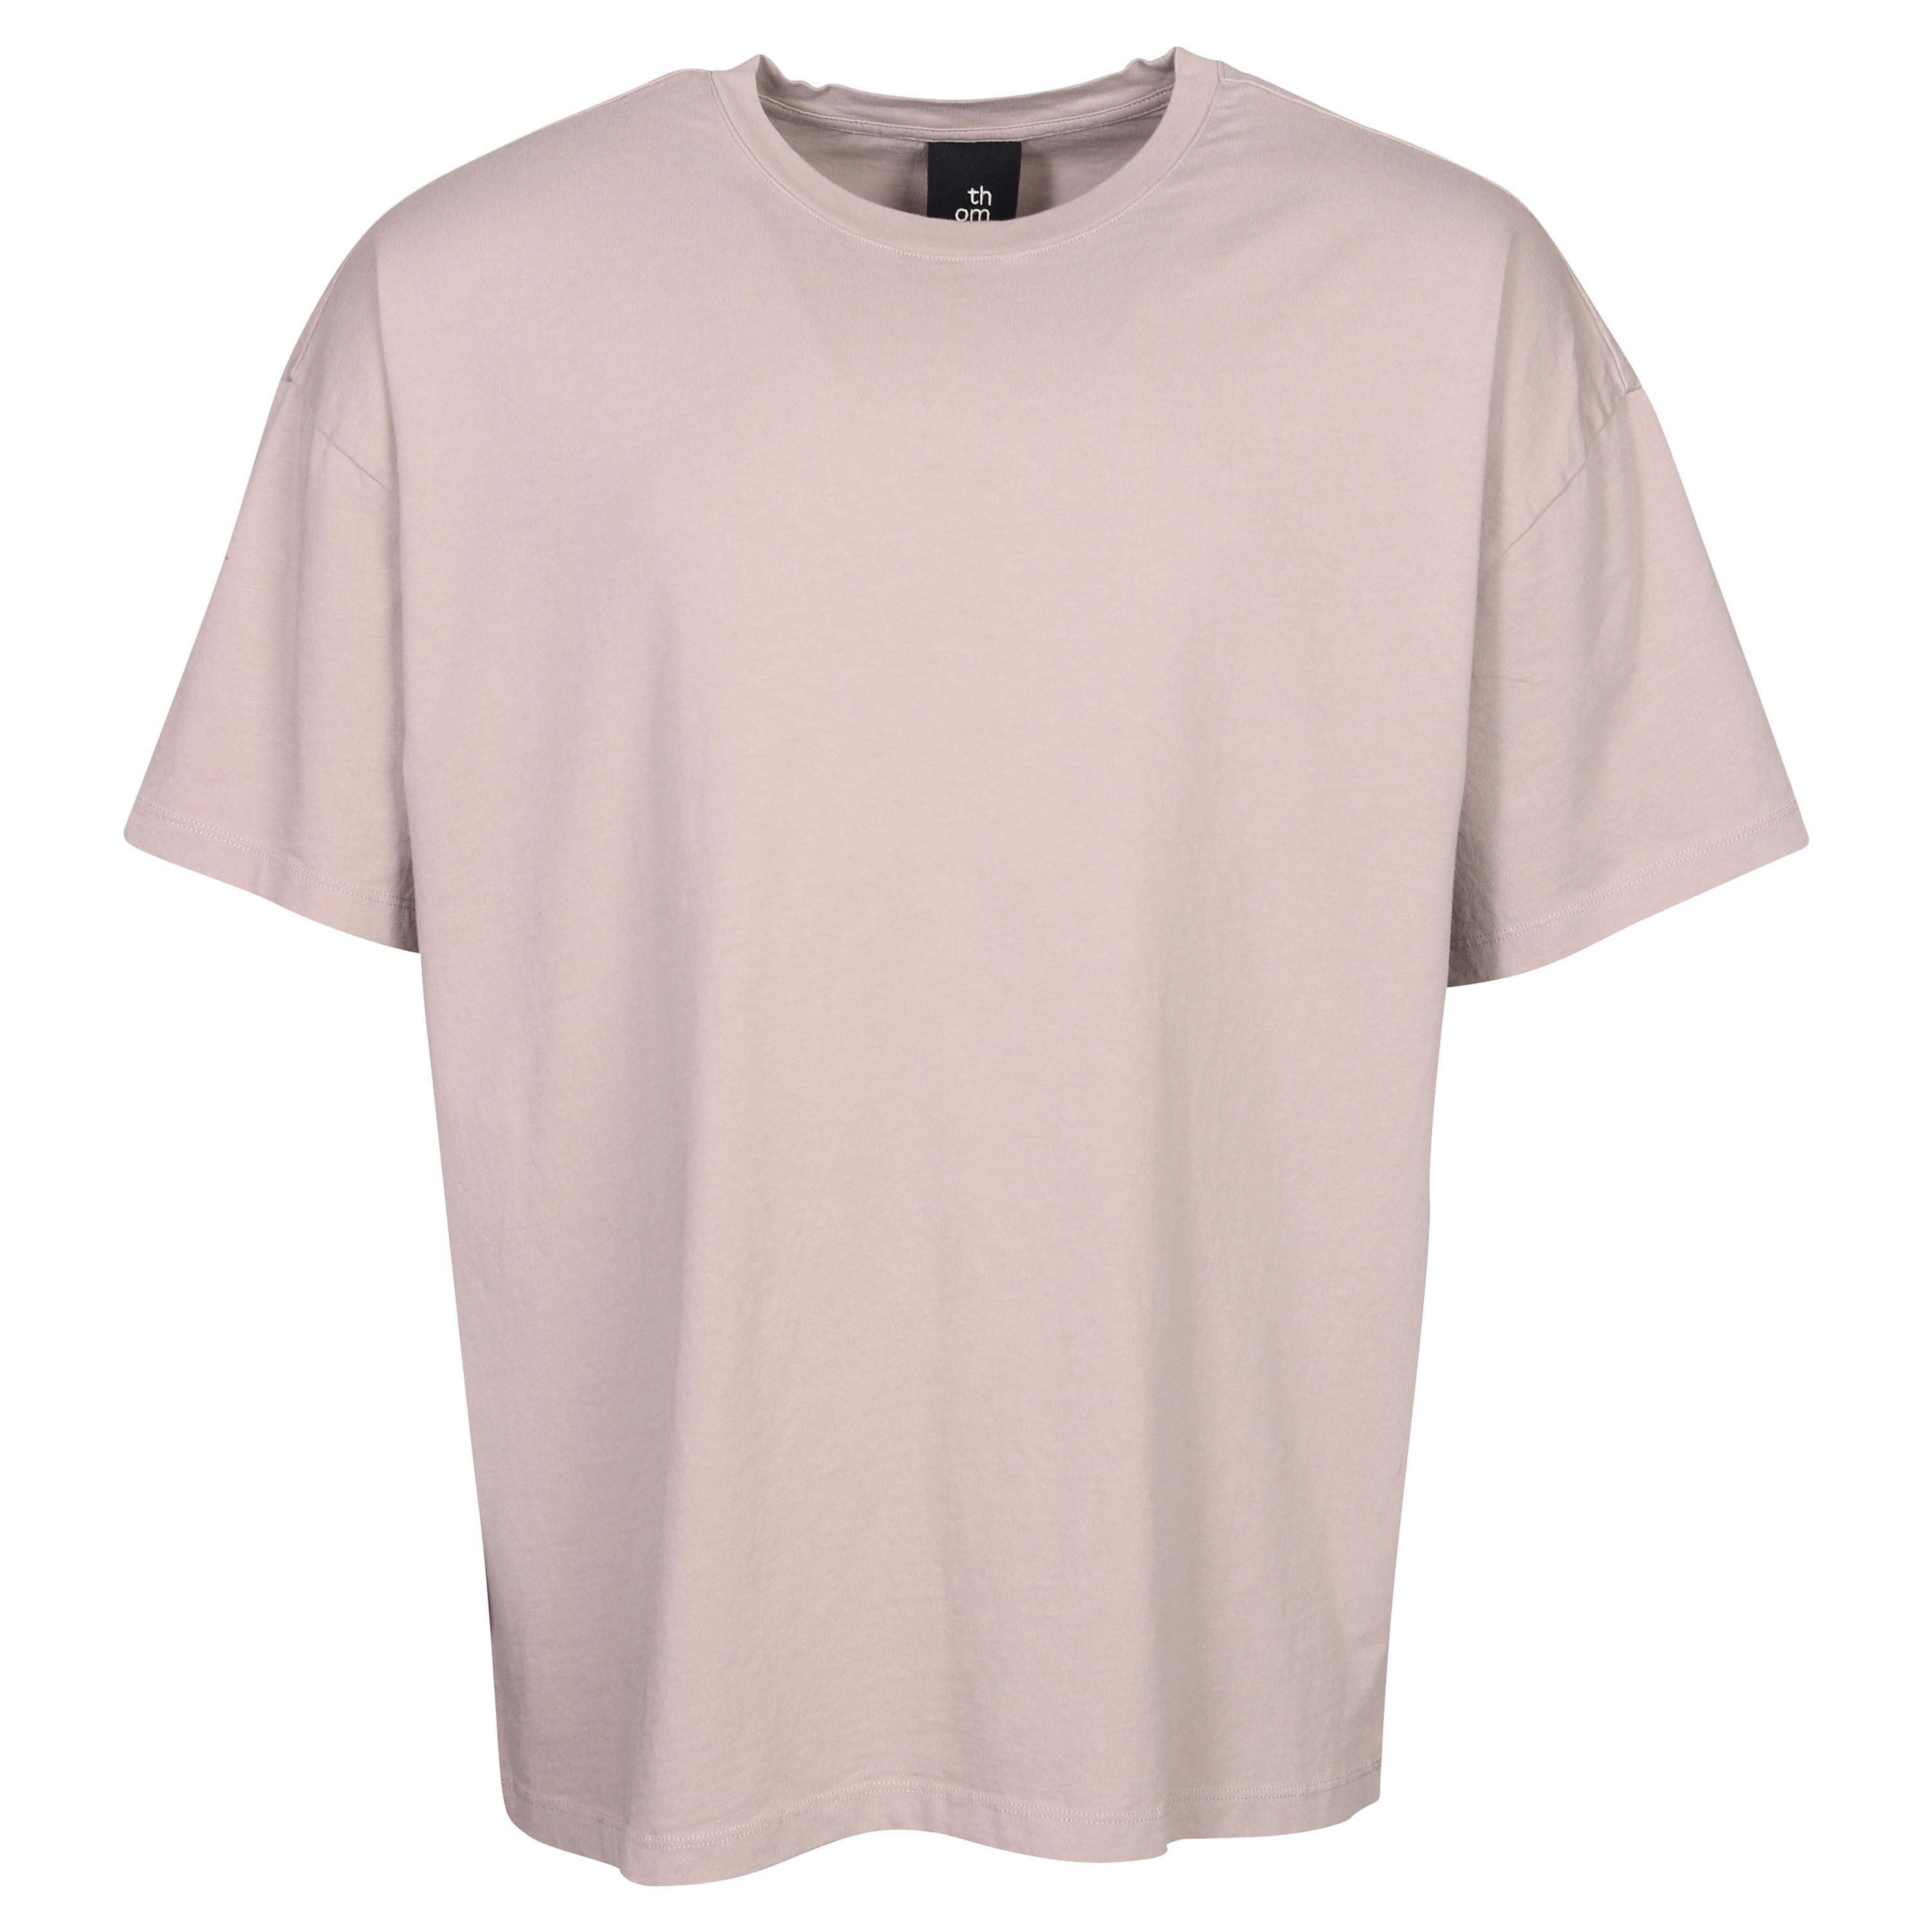 Thom Krom Crew Neck T-Shirt in Sand